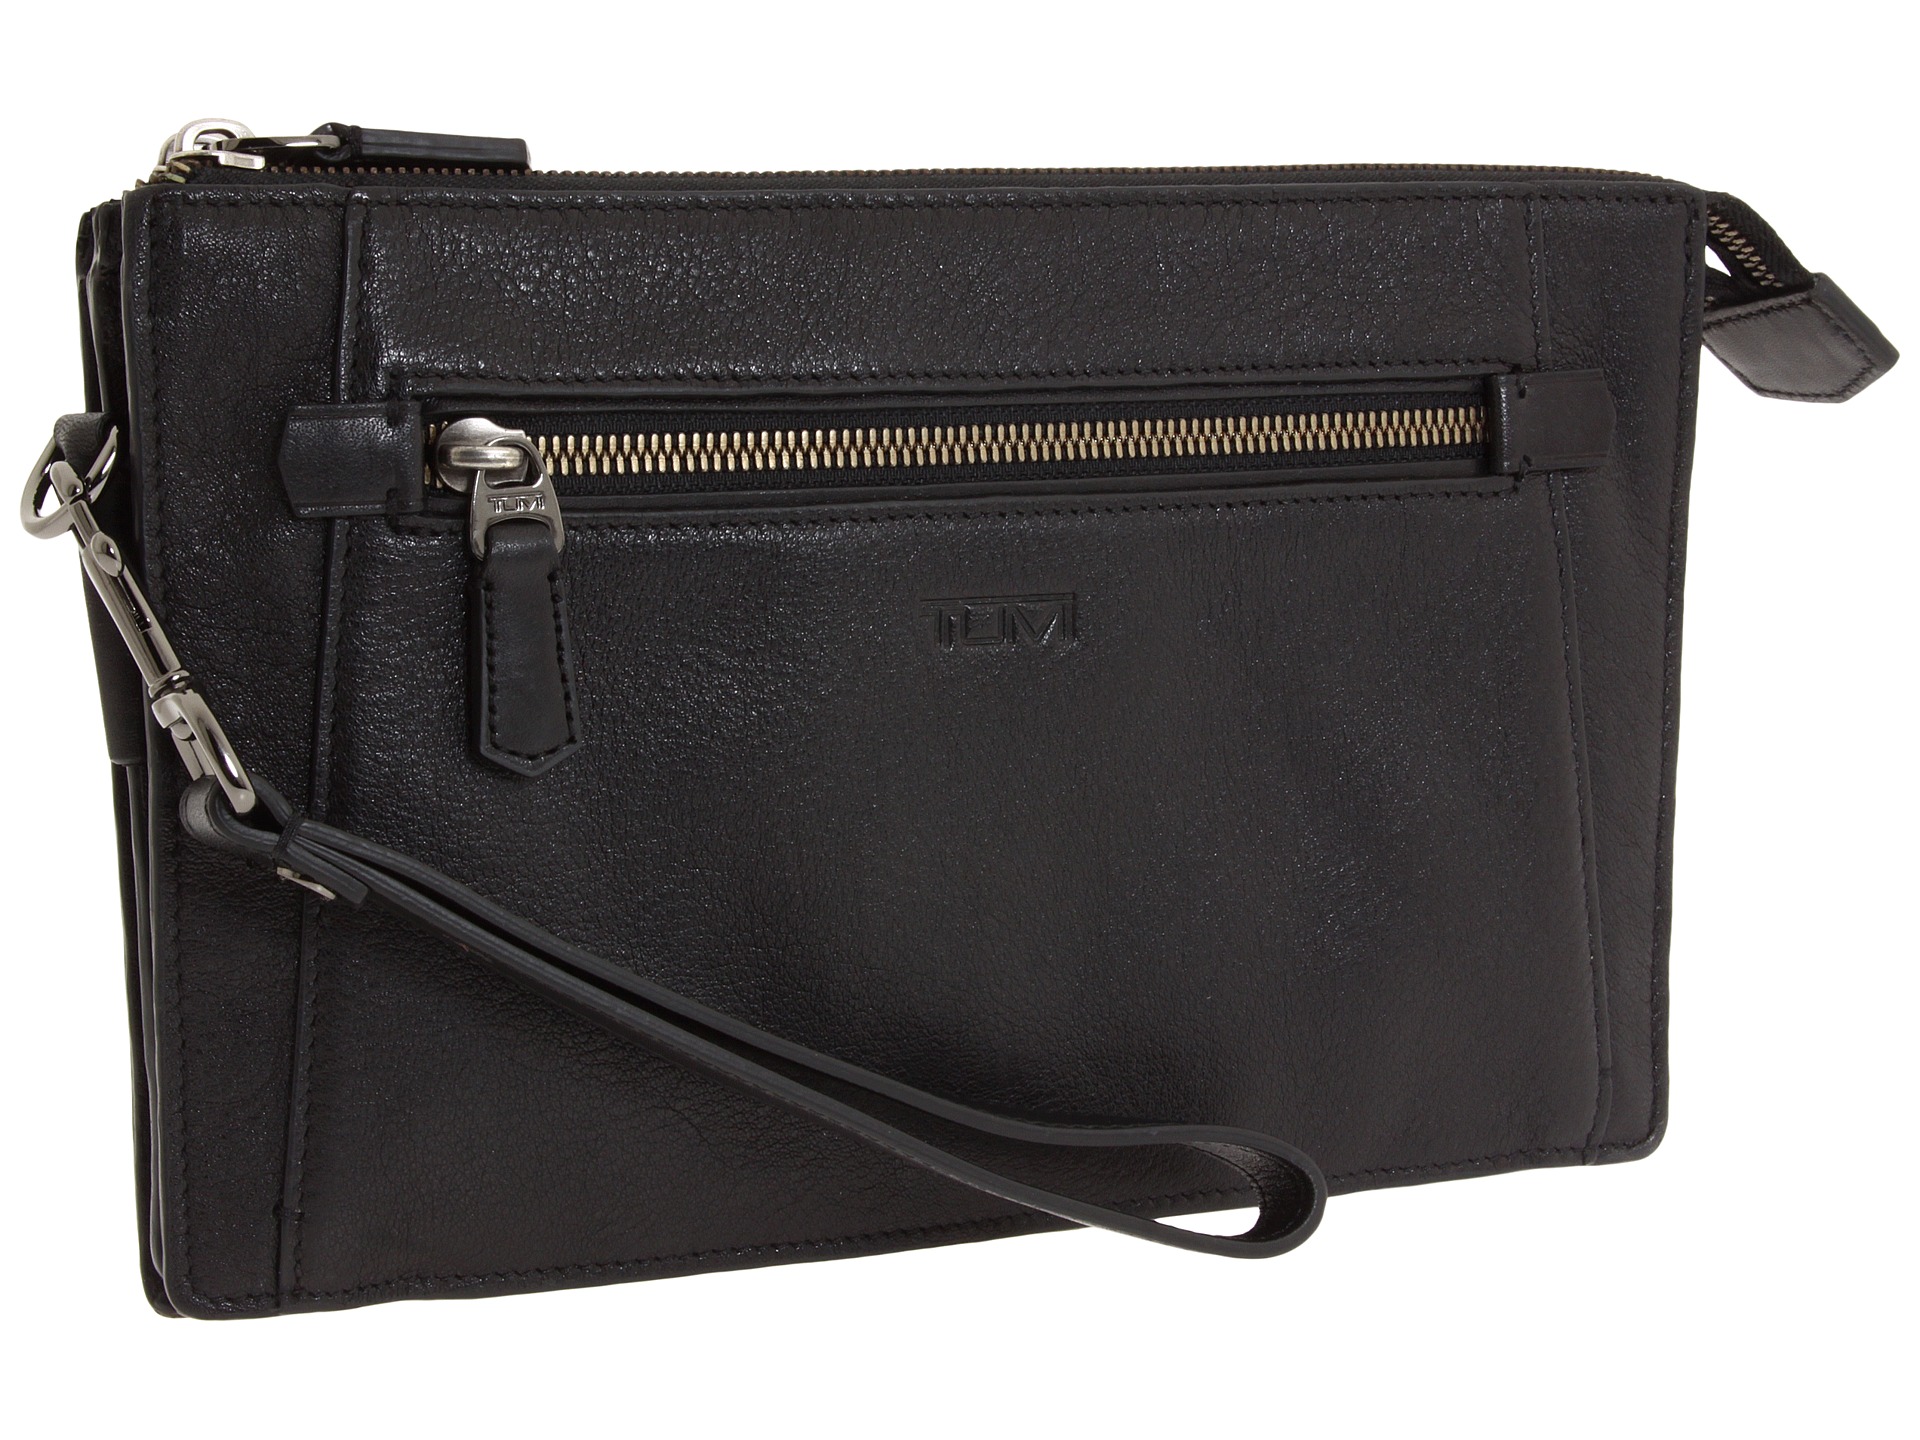 Tumi Beacon Hill - Double Zip Top Leather Clutch - 0 Free Shipping BOTH Ways